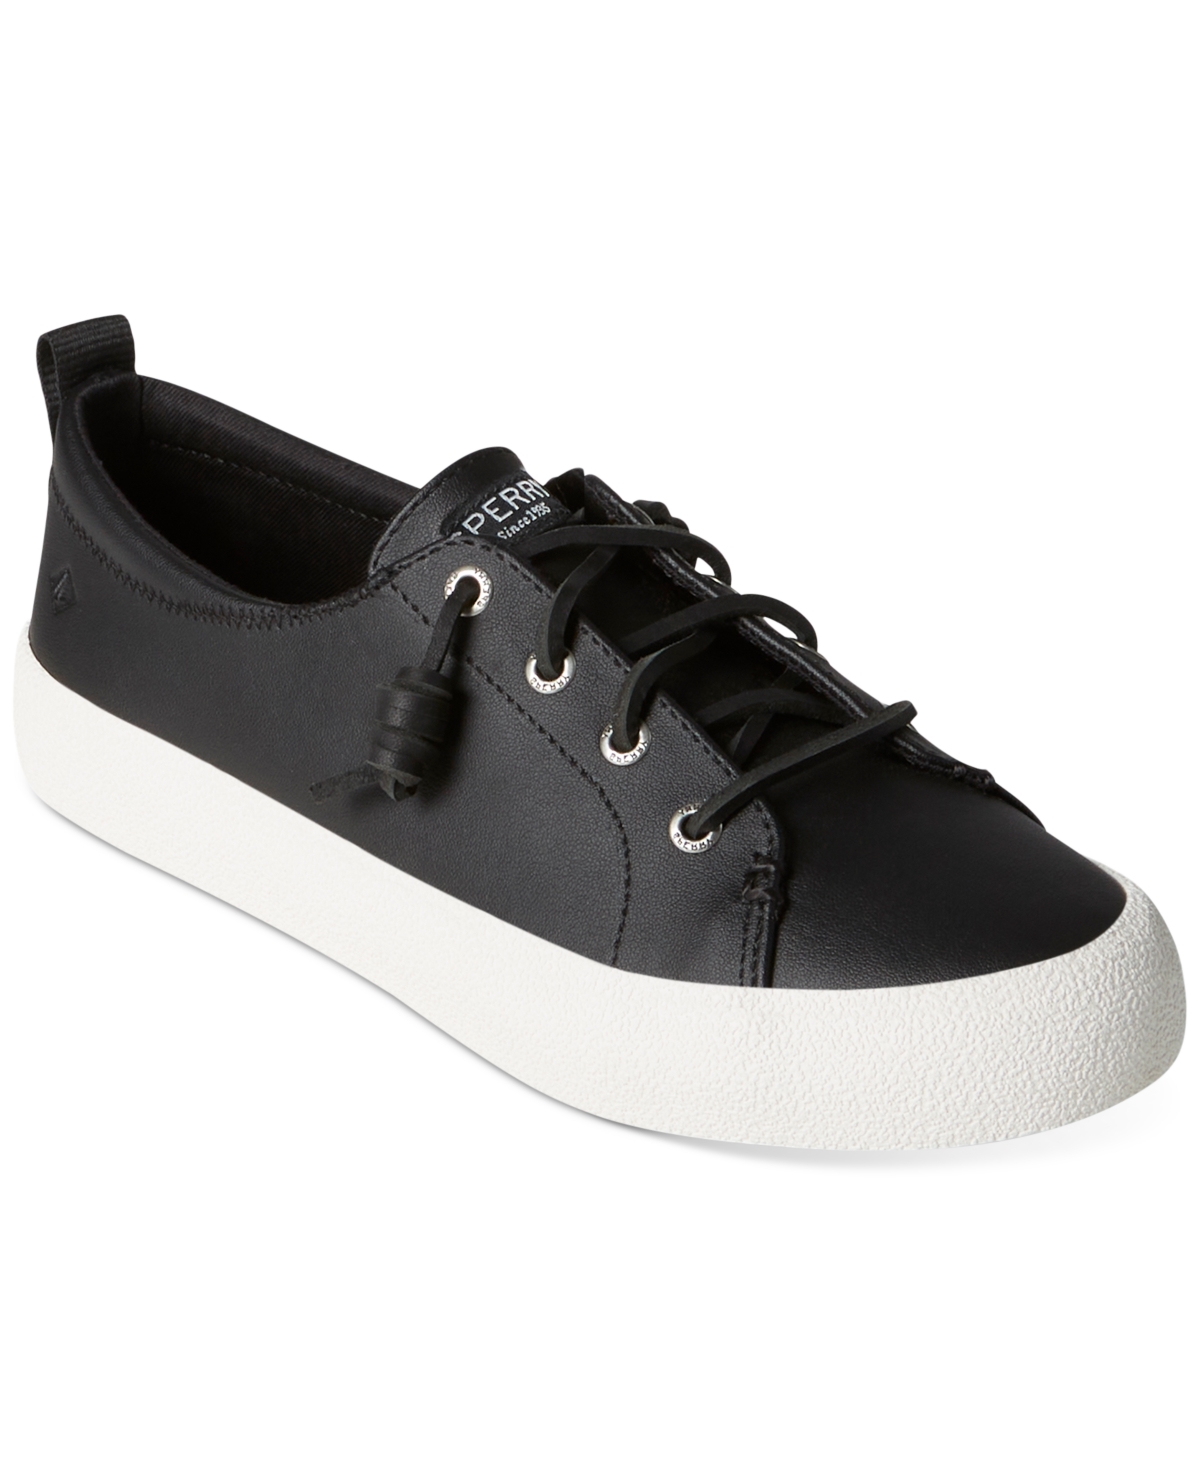 Women's Crest Vibe Leather Sneakers, Created for Macy's - Rose Dust